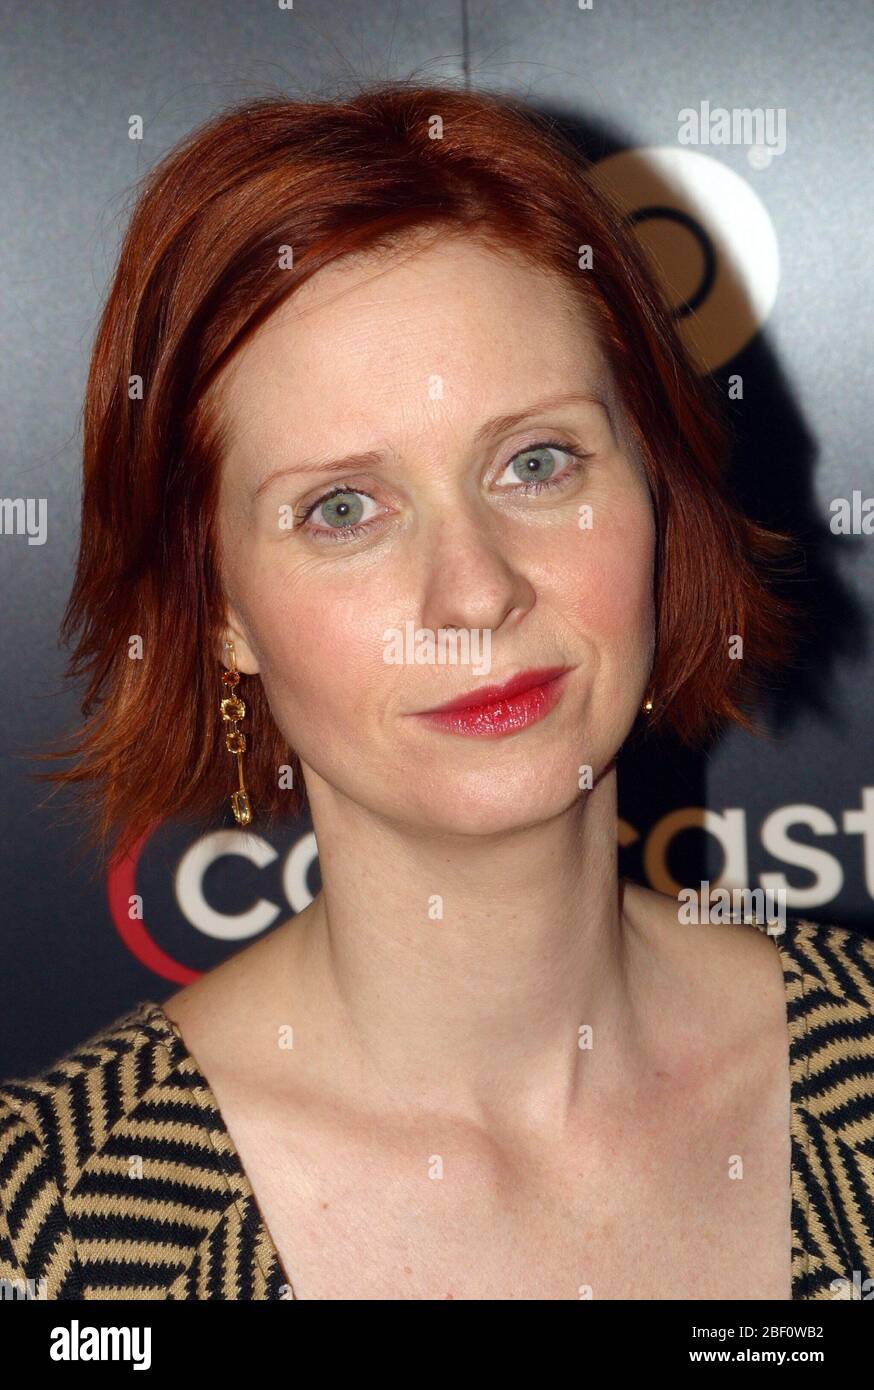 Cynthia Nixon at the Comcast launch party for HBO On Demand & Cinemax On Demand in Philadelphia, PA.  October 16, 2003.  Credit: Scott Weiner / MediaPunch Stock Photo